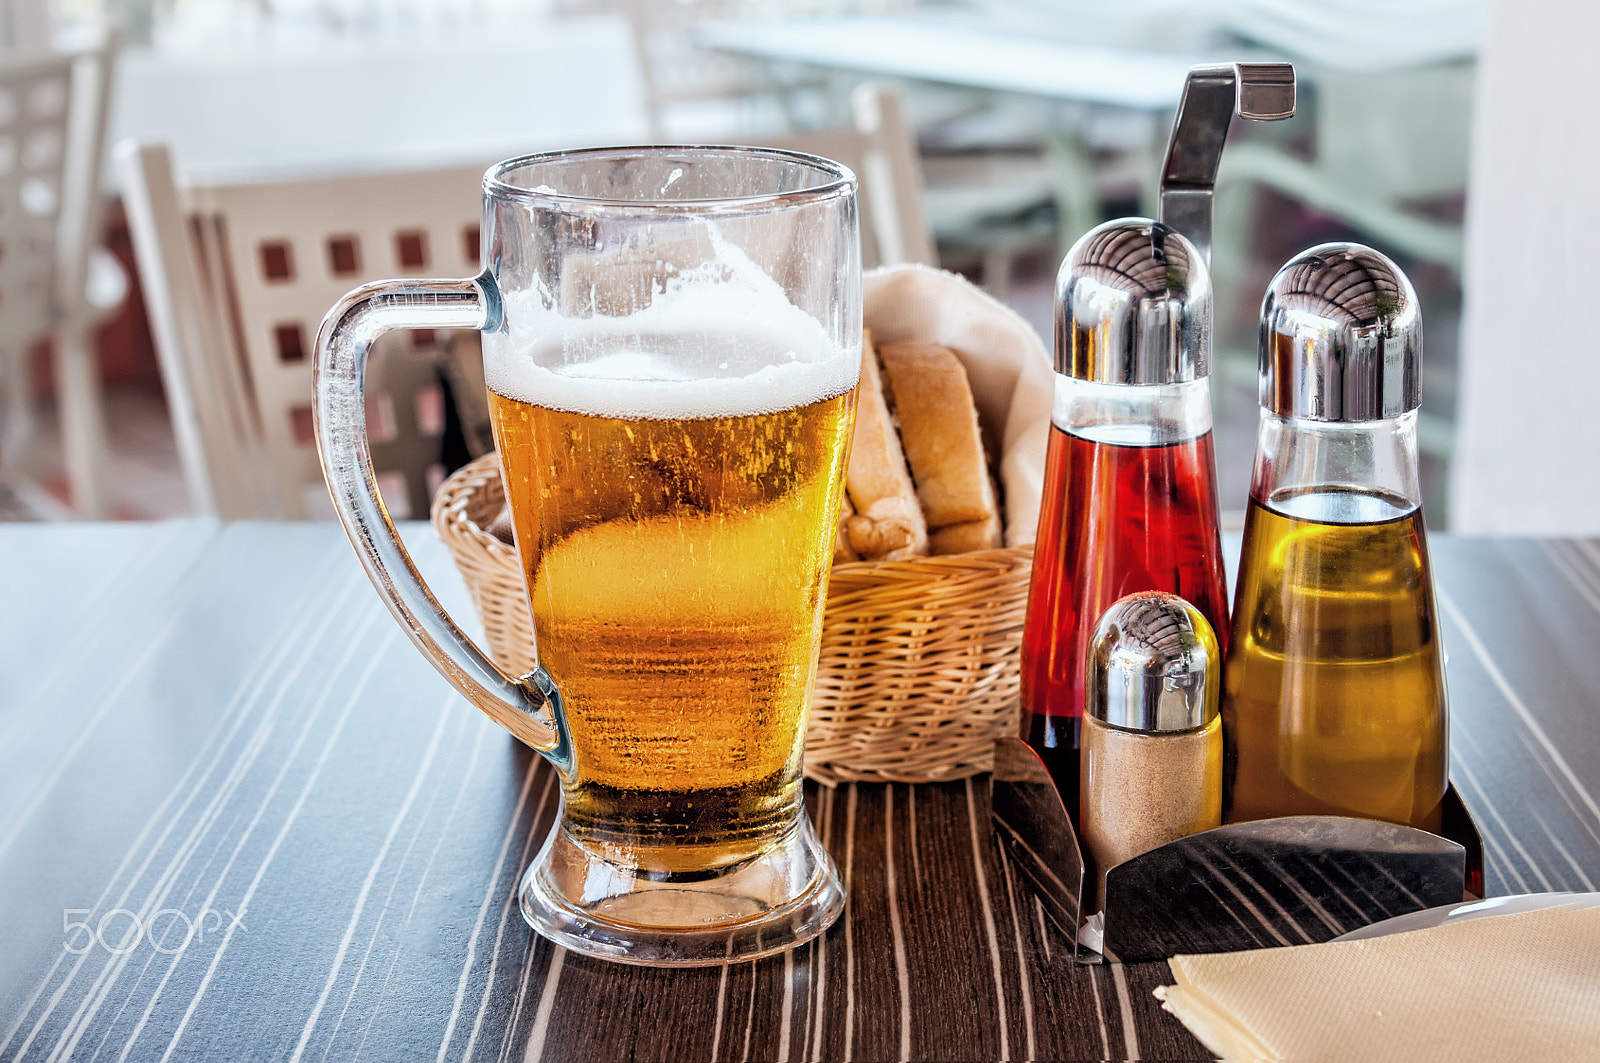 Nikon D90 sample photo. Beer in the glass on the table with serving photography